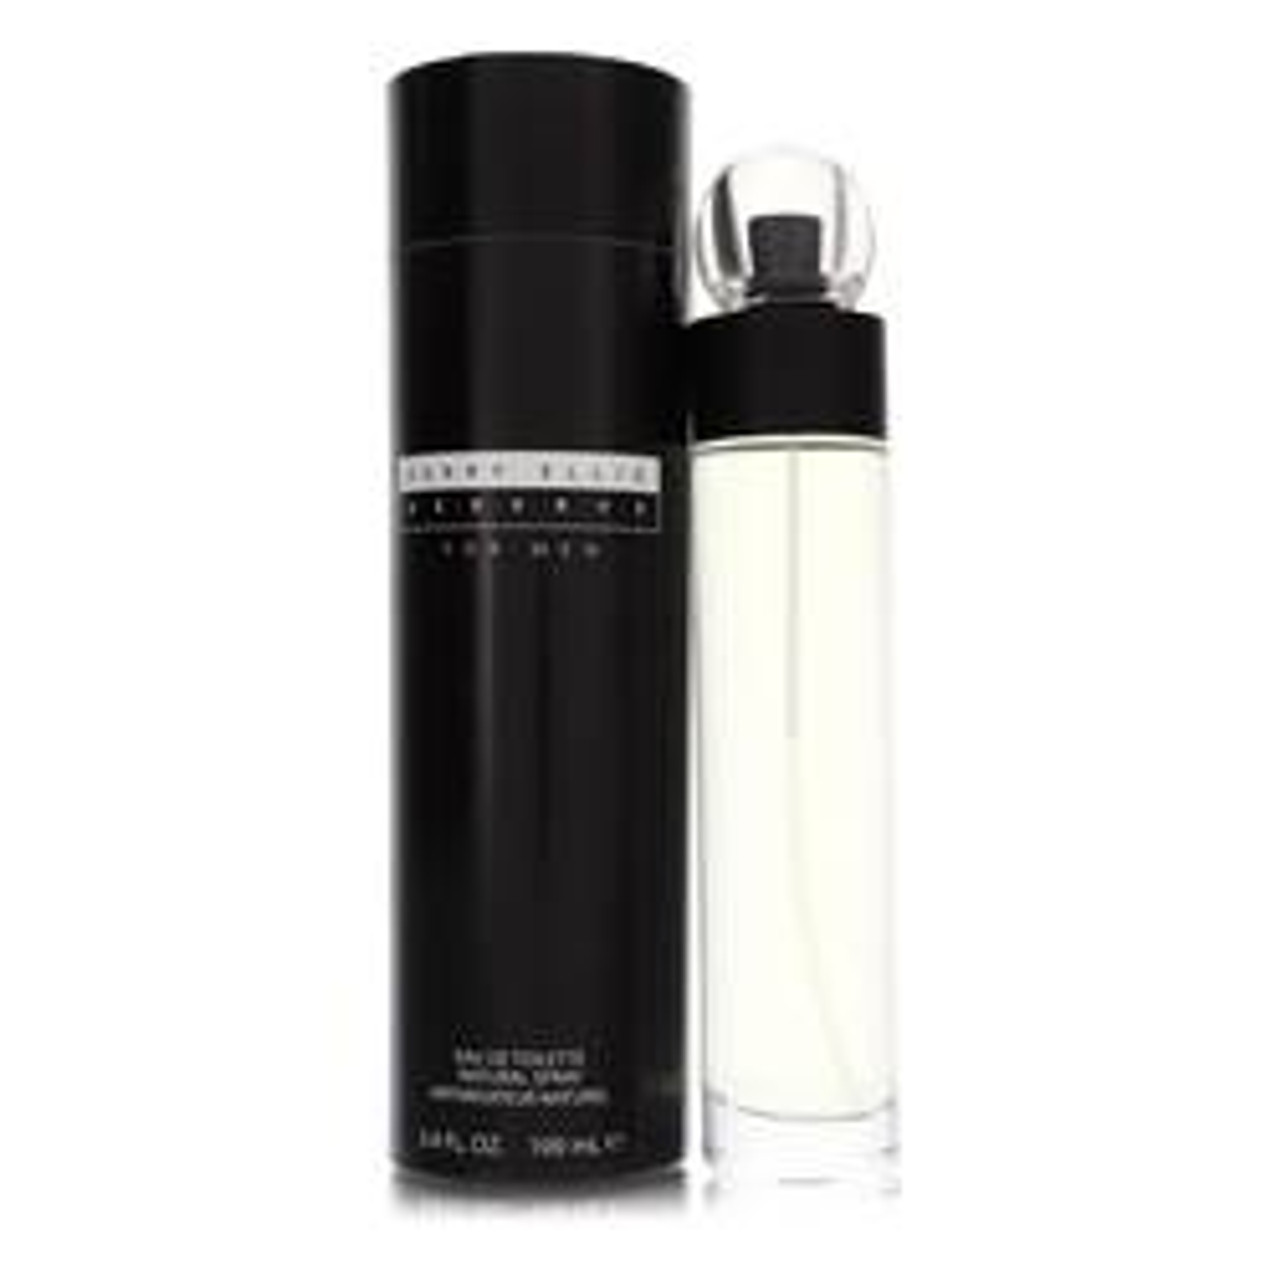 Perry Ellis Reserve Cologne By Perry Ellis Eau De Toilette Spray 3.4 oz for Men - [From 75.00 - Choose pk Qty ] - *Ships from Miami